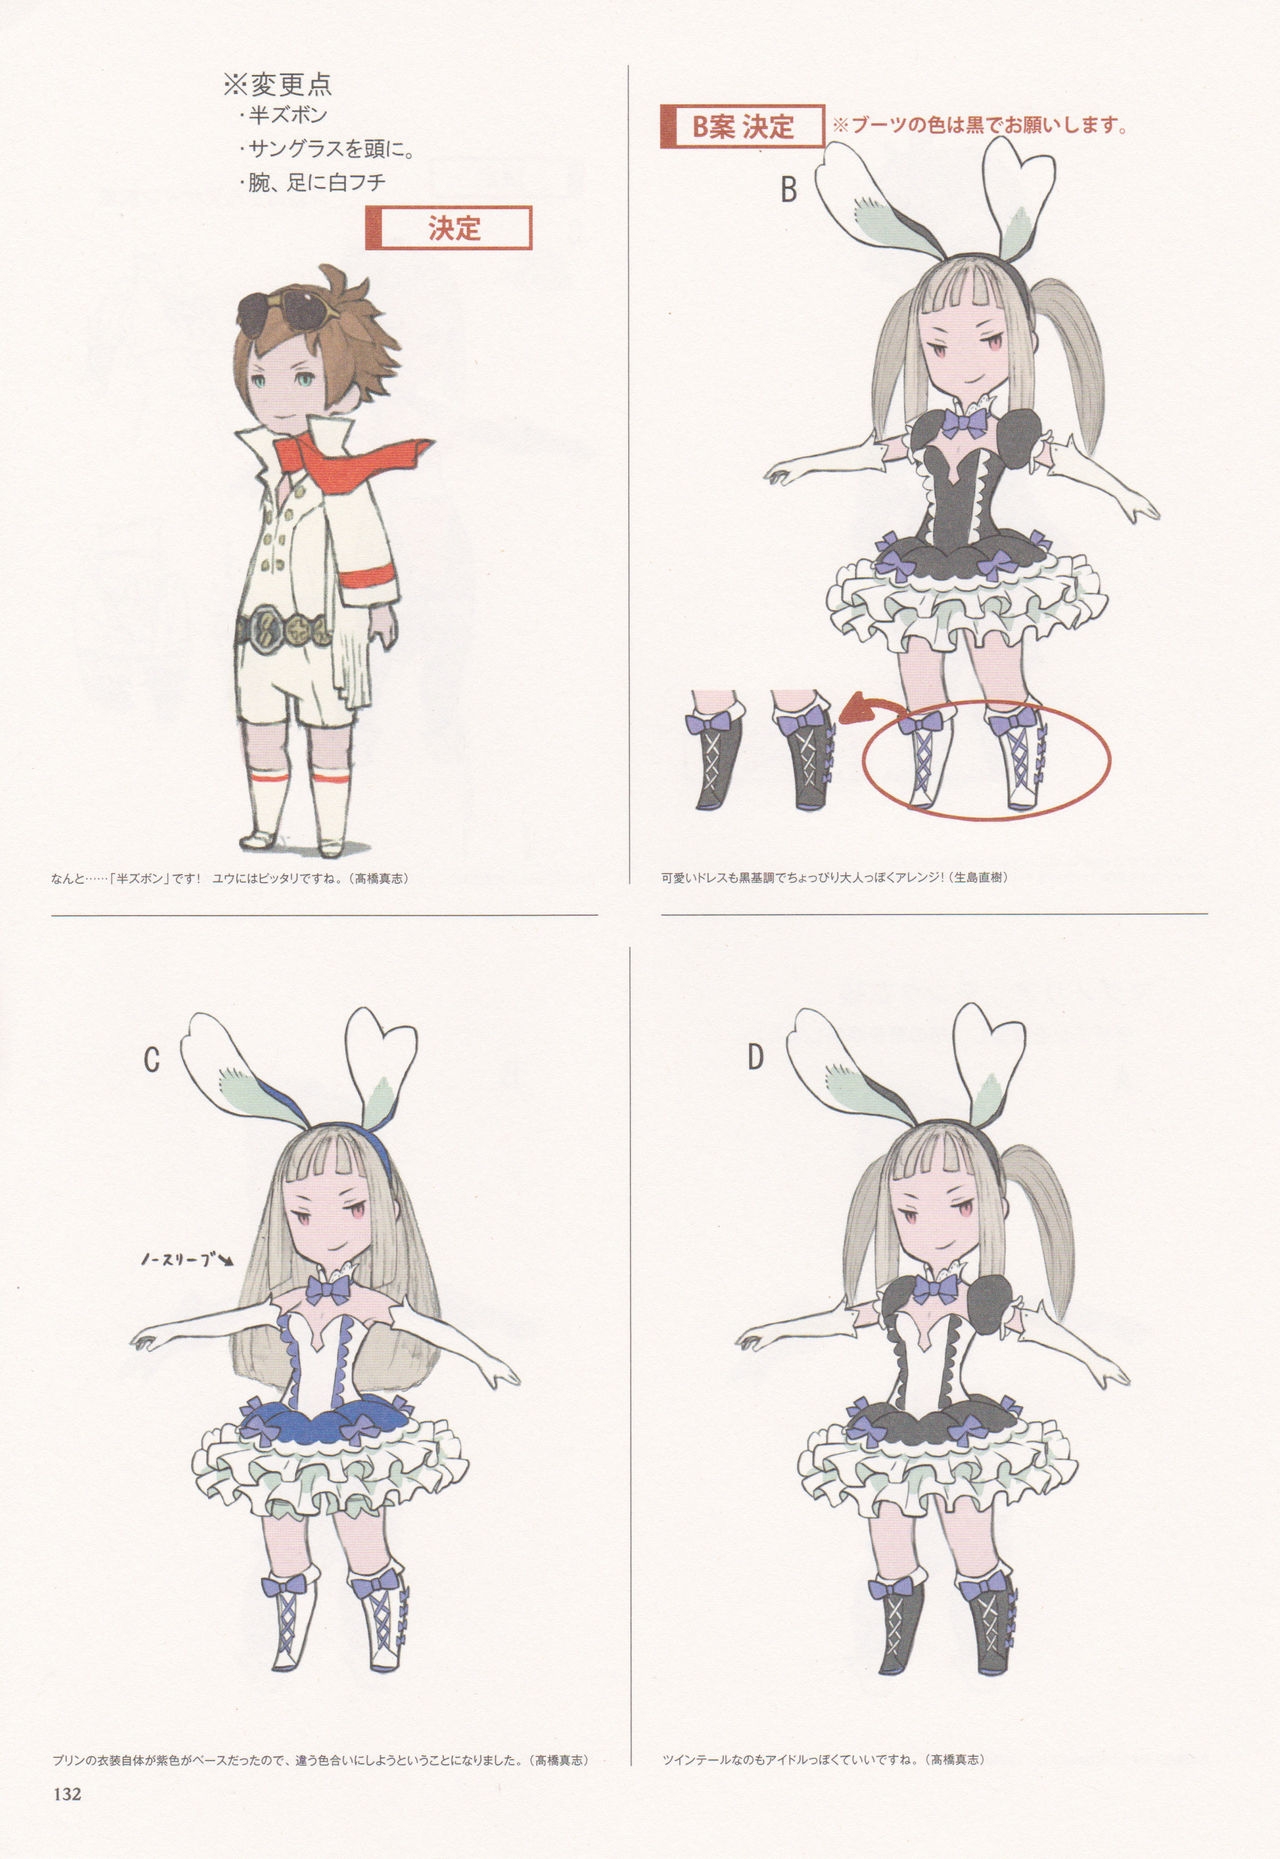 Bravely Second - End Layer - Design Works THE ART OF BRAVELY 2013-2015 132